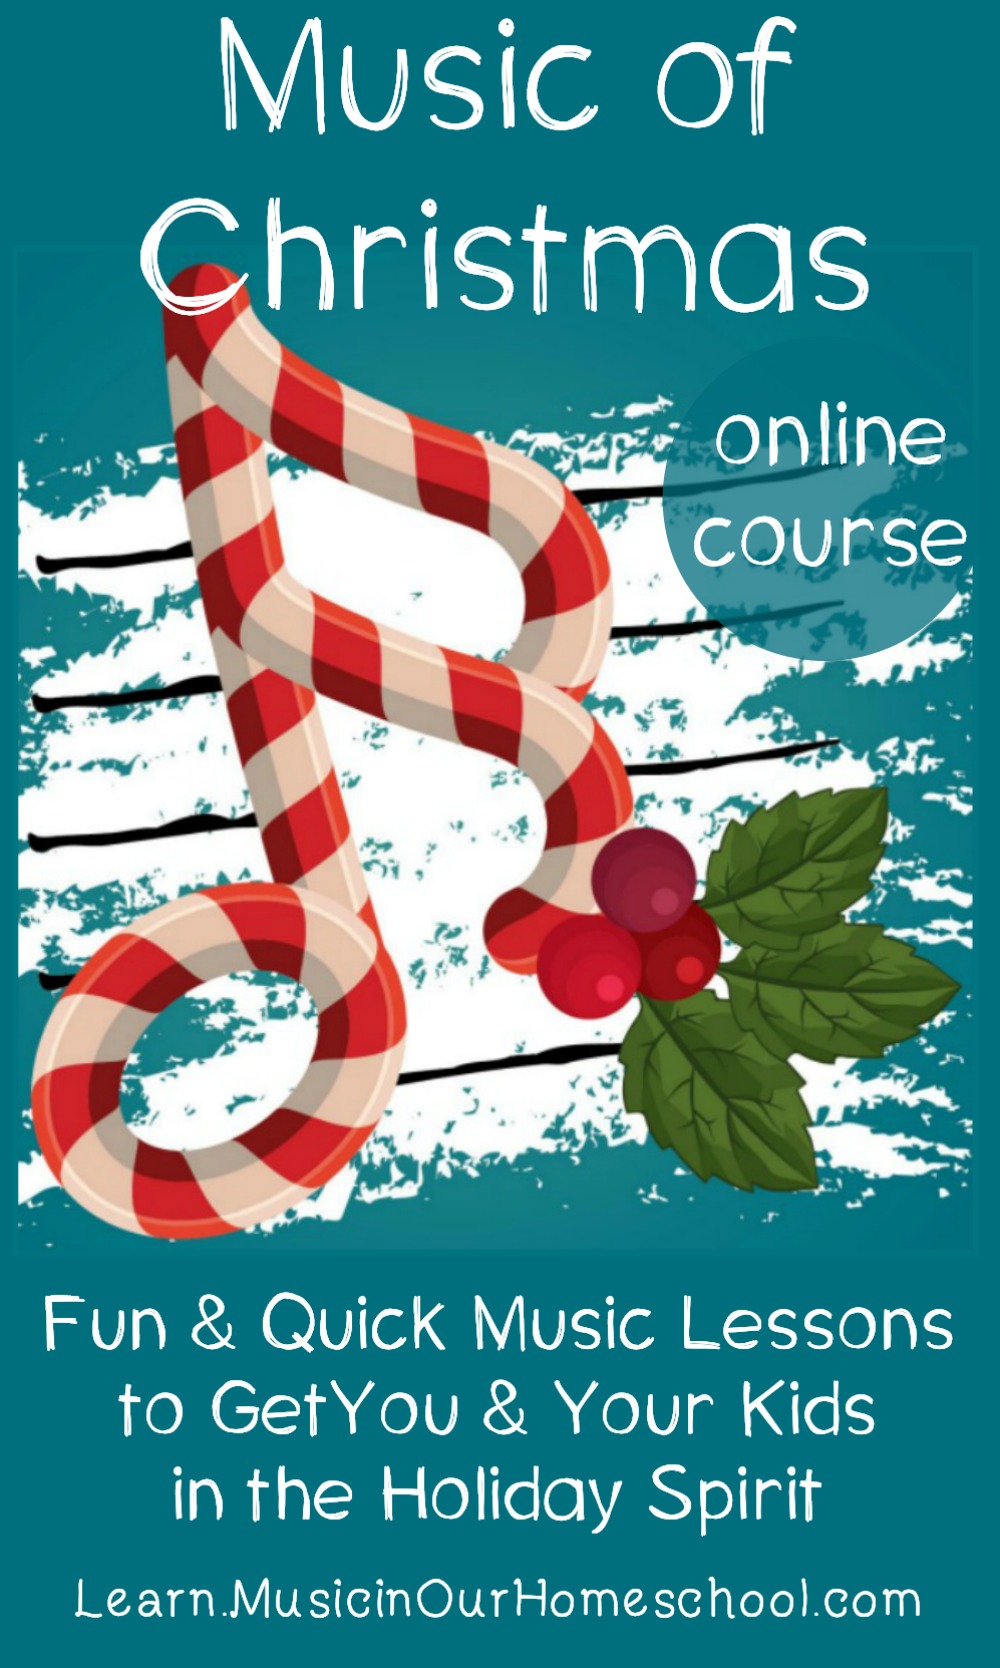 Music of Christmas online course, an online course to get you in the holiday Christmas spirit with 15-Minute Music Lessons from Learn.MusicinOurHomeschool.com #Christmas #Christmasmusic #musiclesson #homeschoolmusic